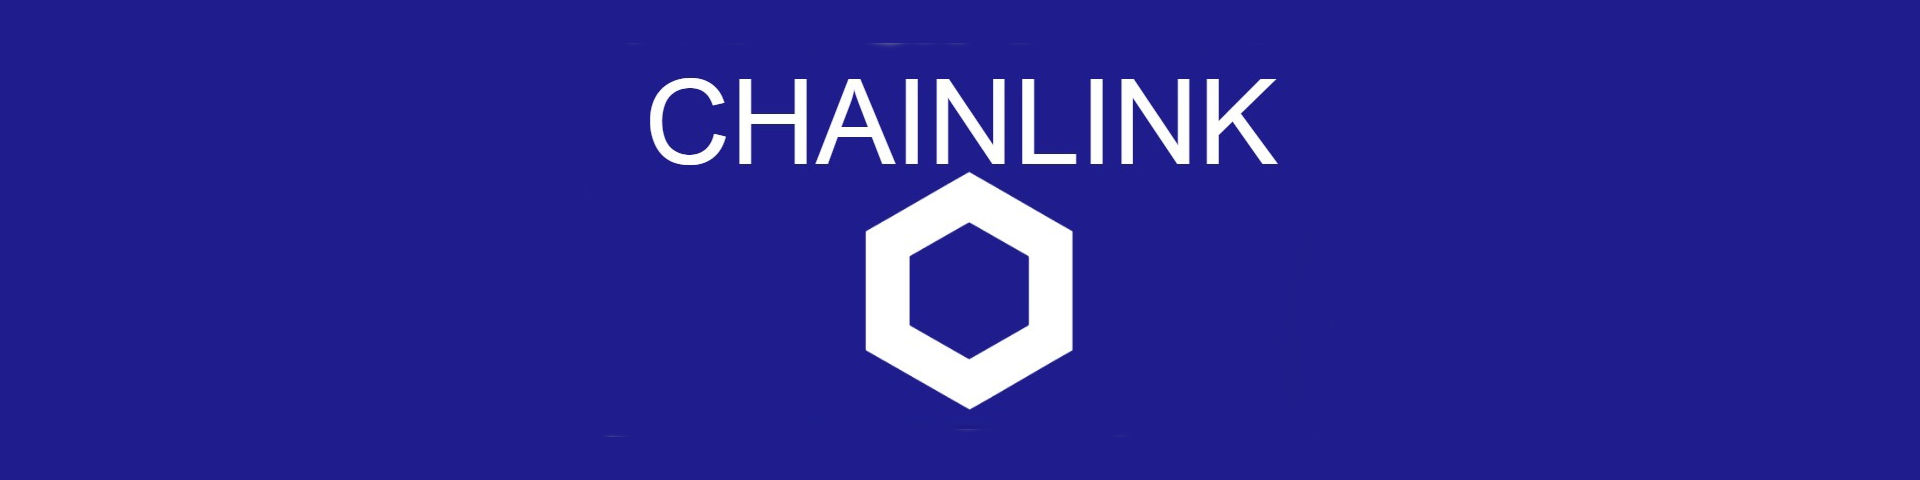 Chainlink links cryptocurrency to the real world